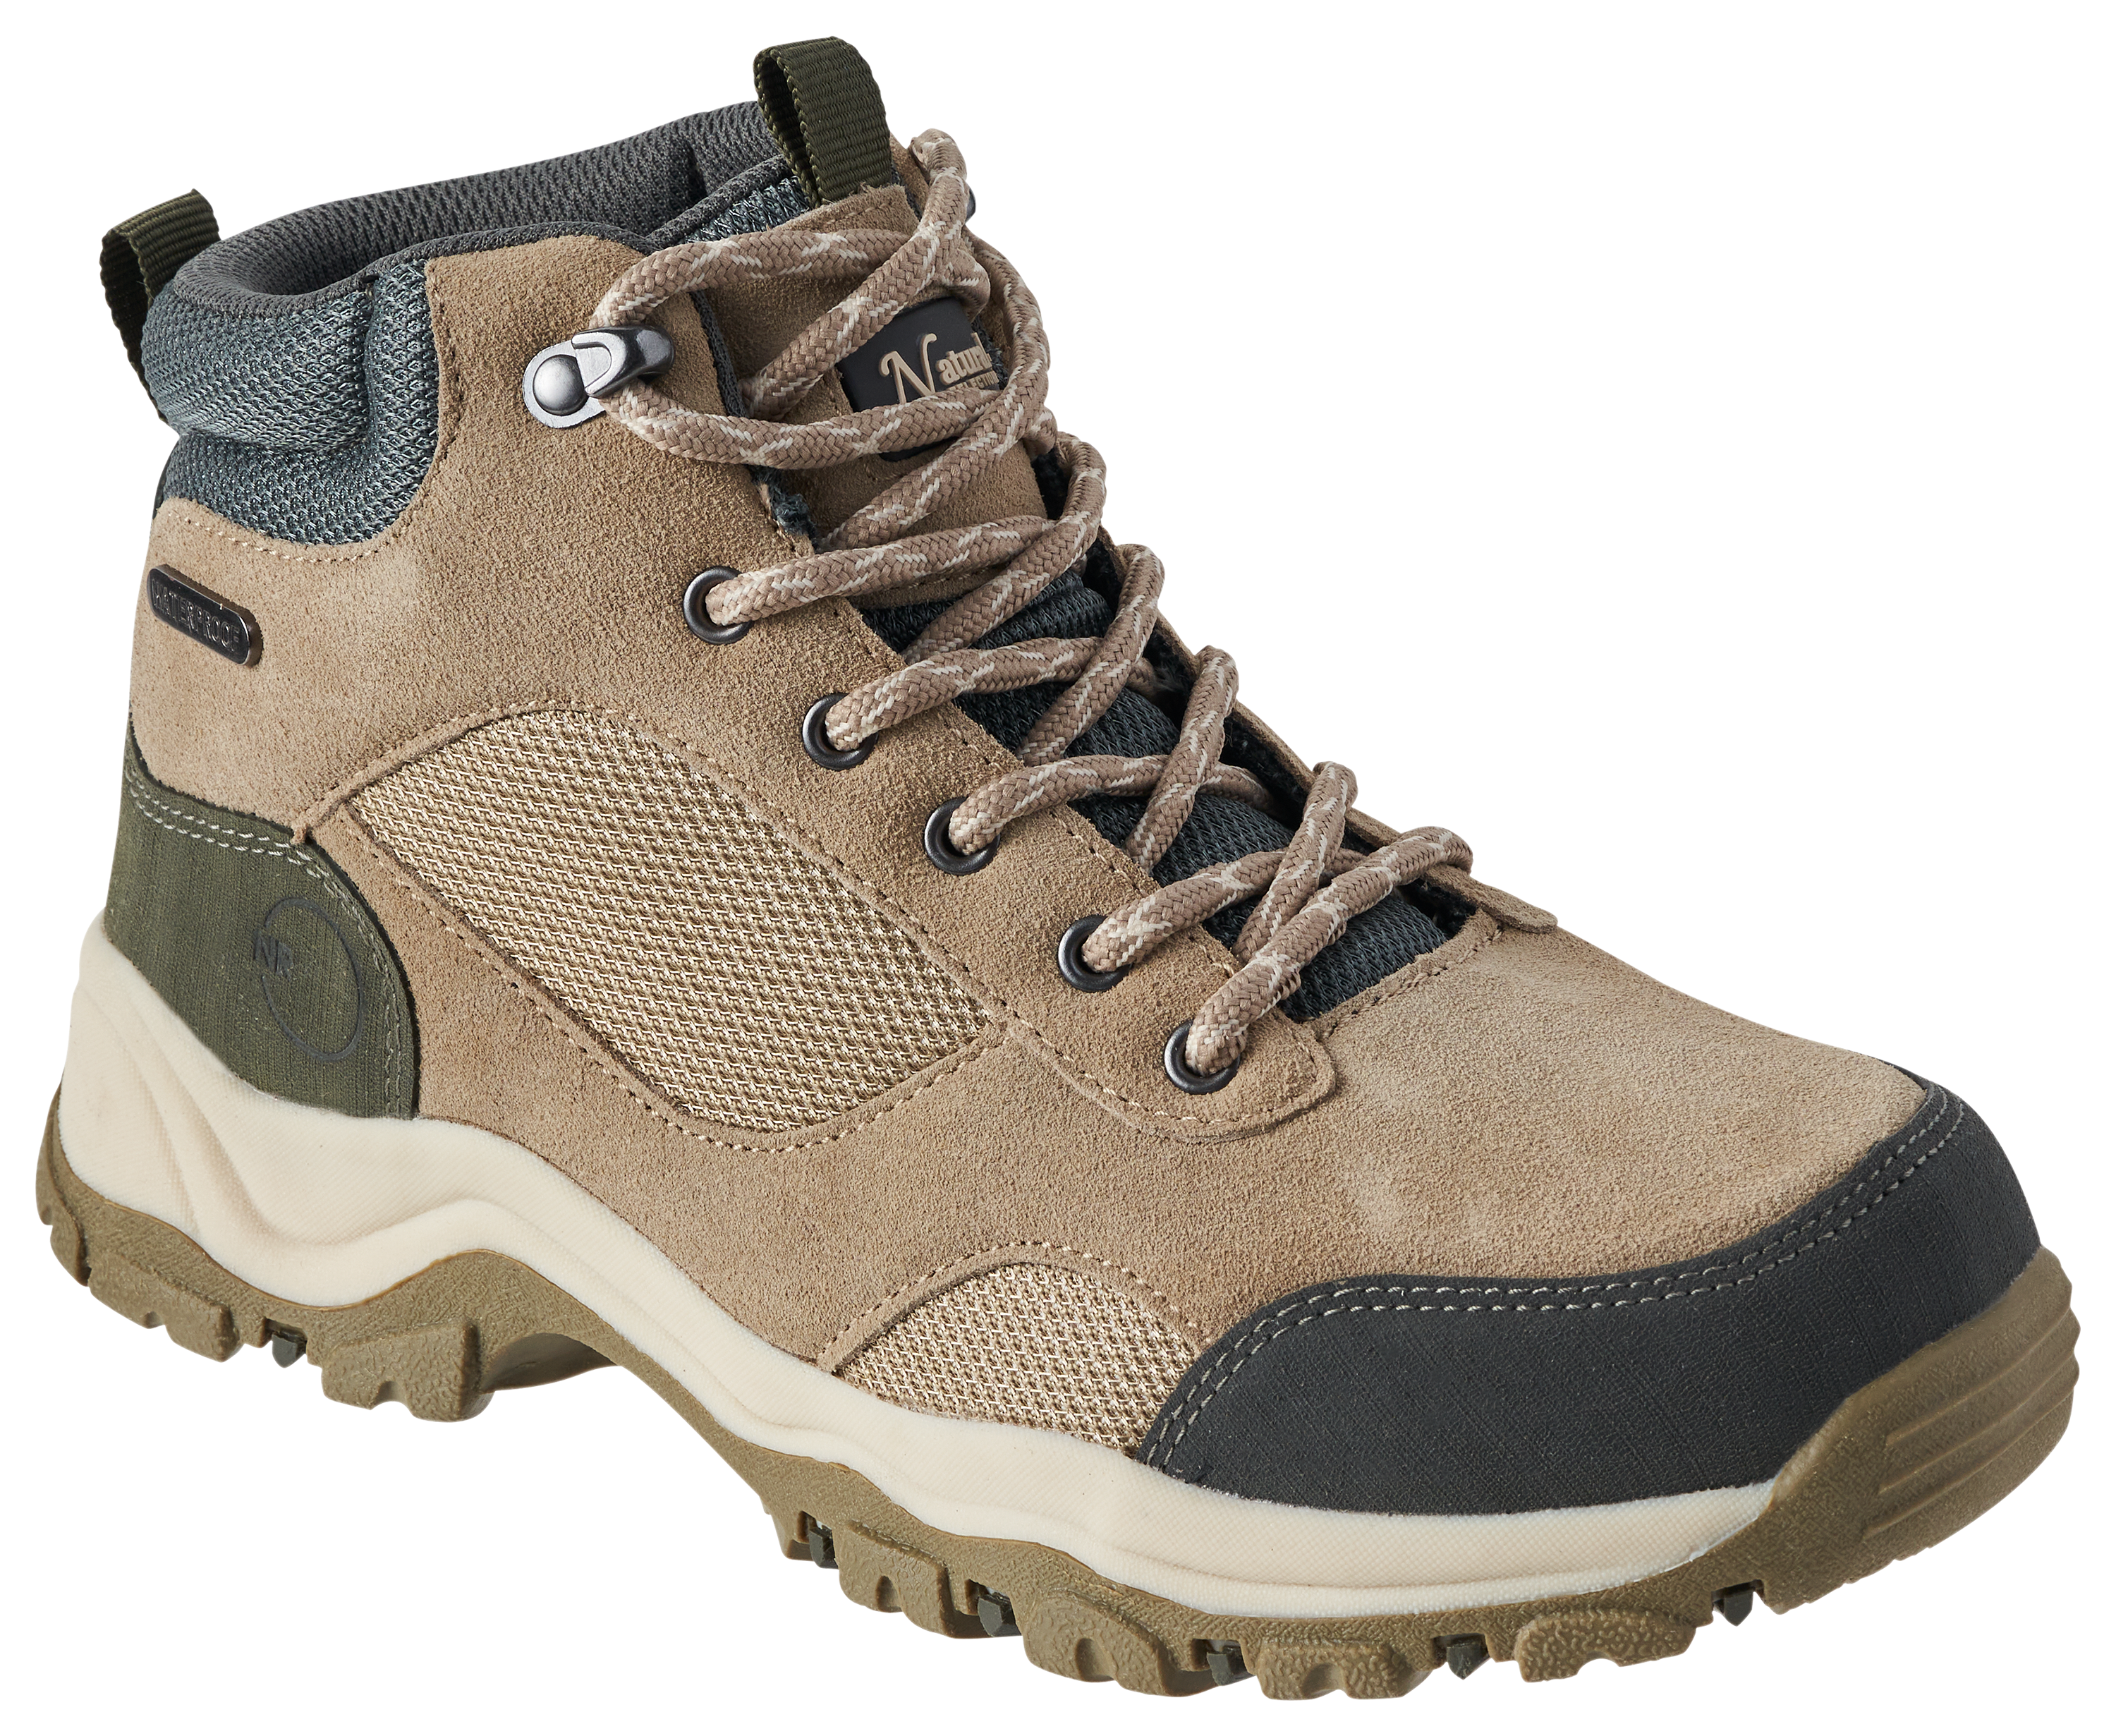 Natural Reflections Skyline II Mid Waterproof Hiking Boots for Ladies - Tan/Charcoal - 8M